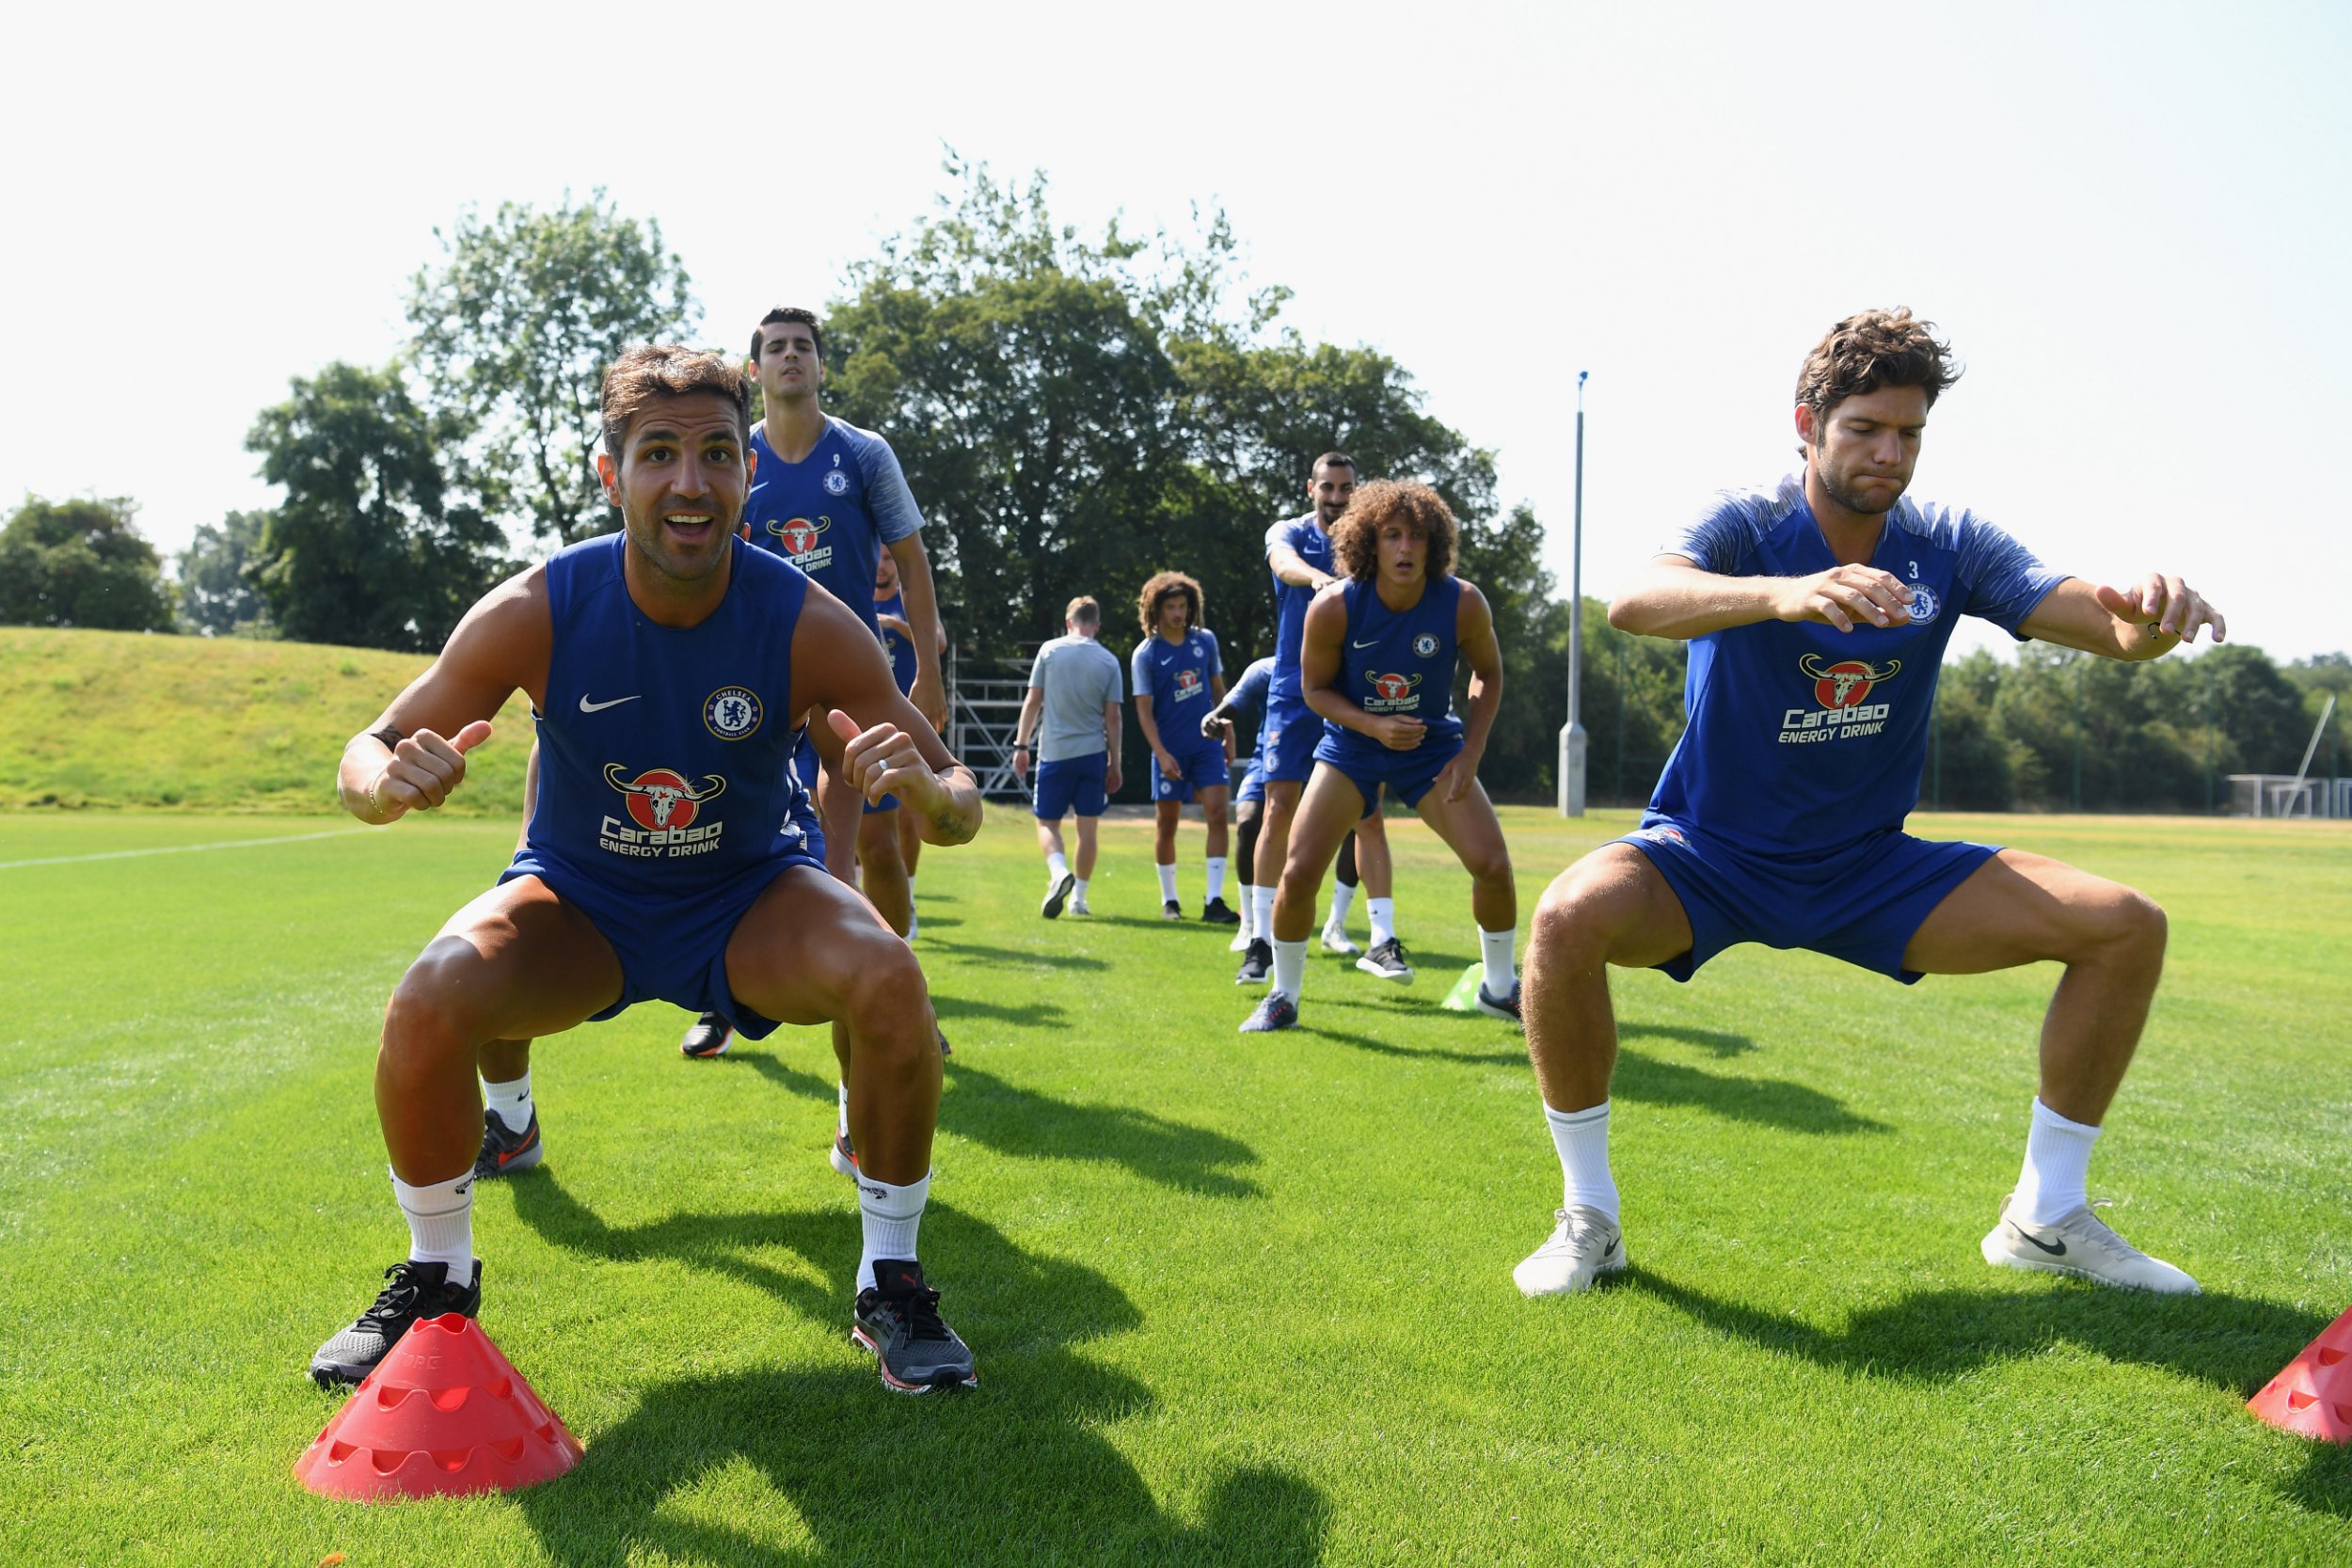 Antonio Conte was at Cobham training ground for day one of Chelsea's pre-season